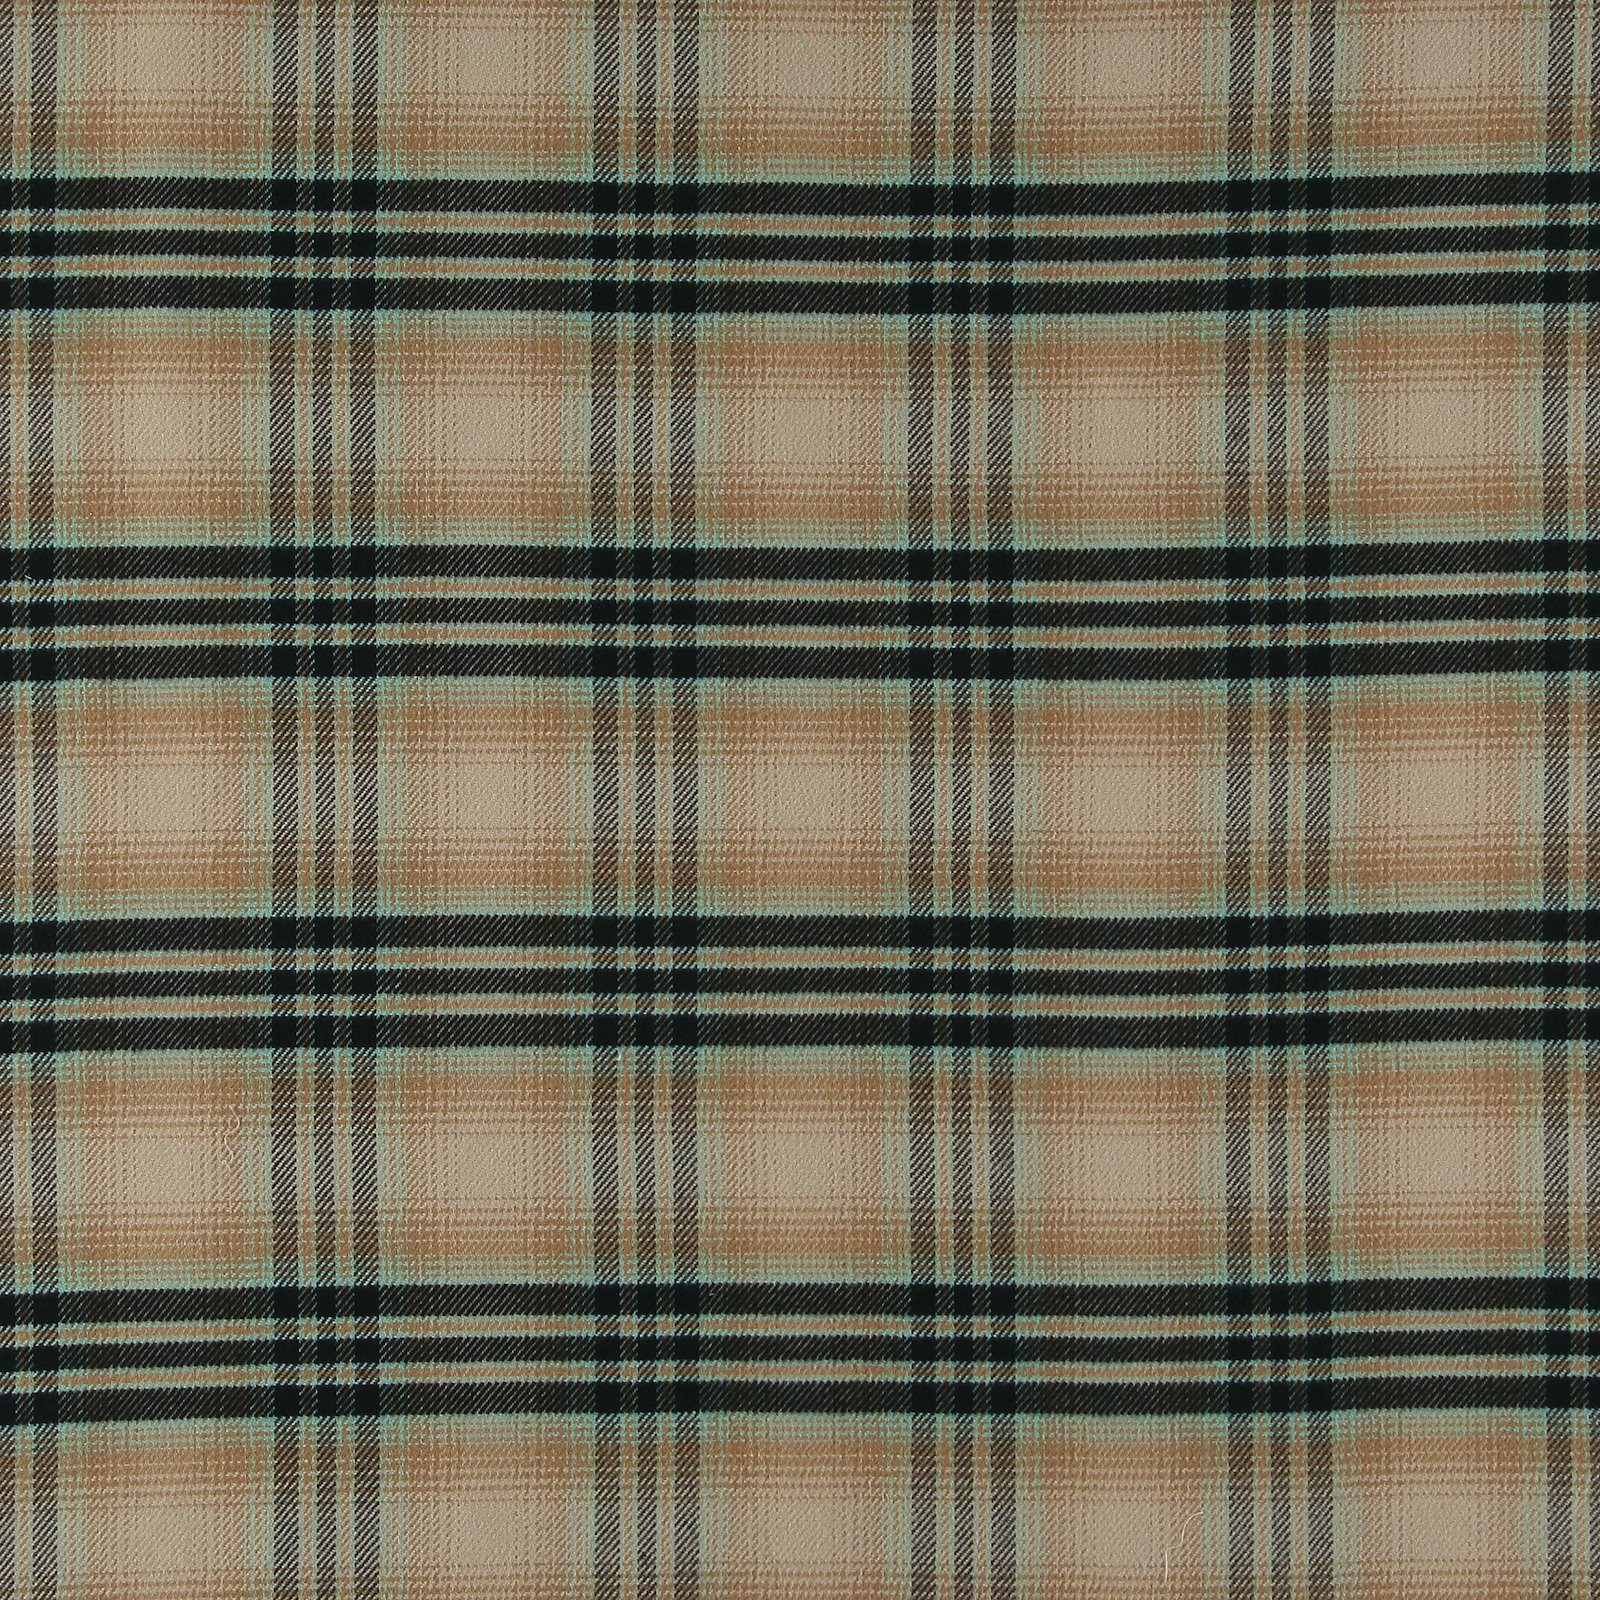 Woven YD check mint/sand brushed surface 400320_pack_sp